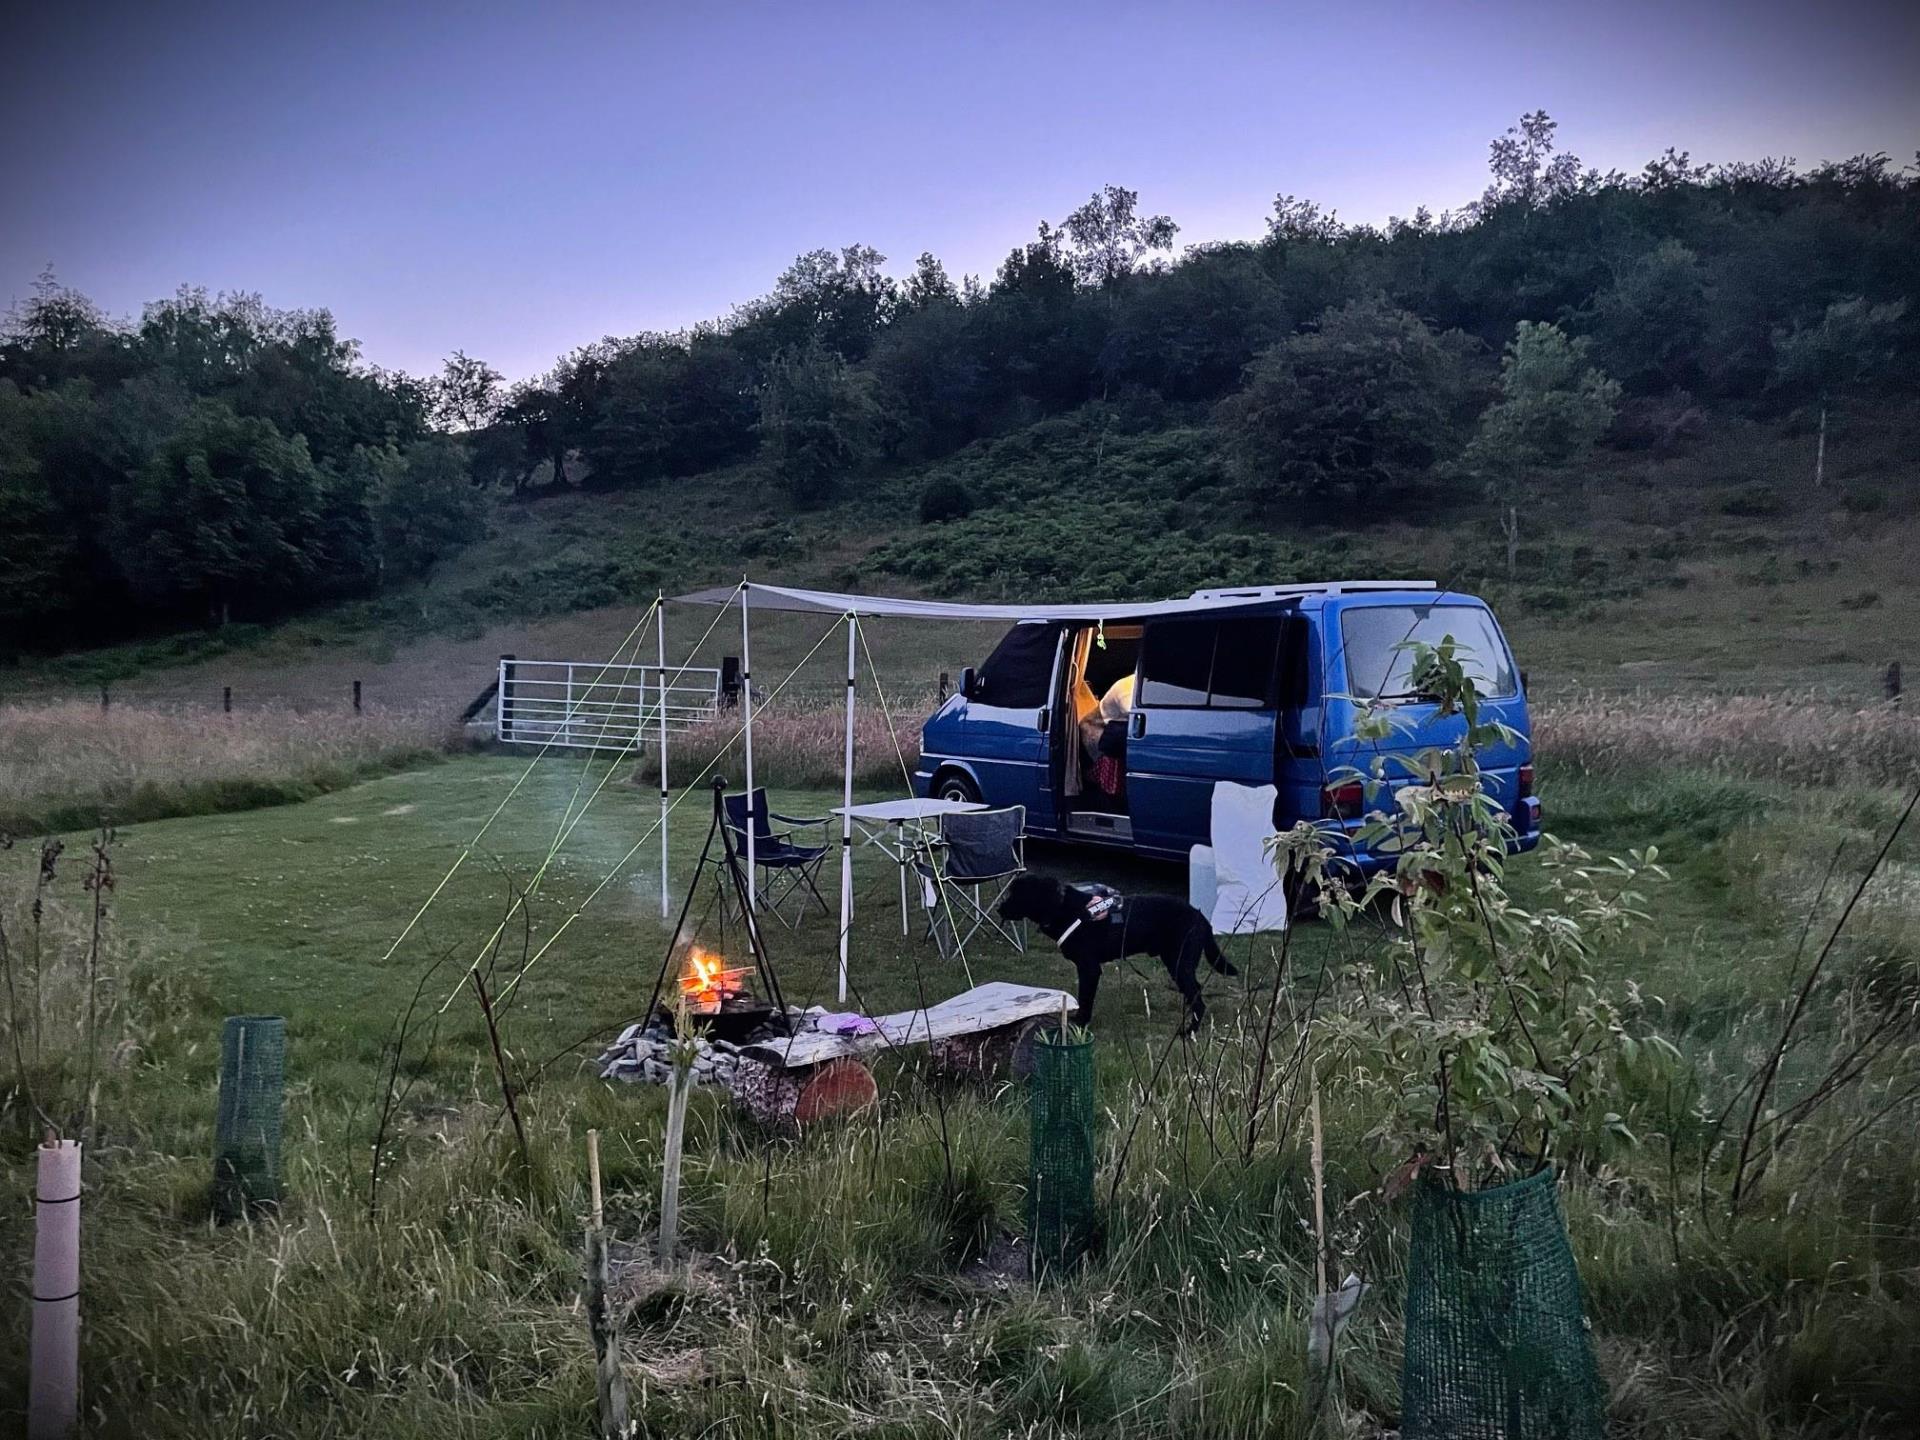 Our Campervan pitch at sunset